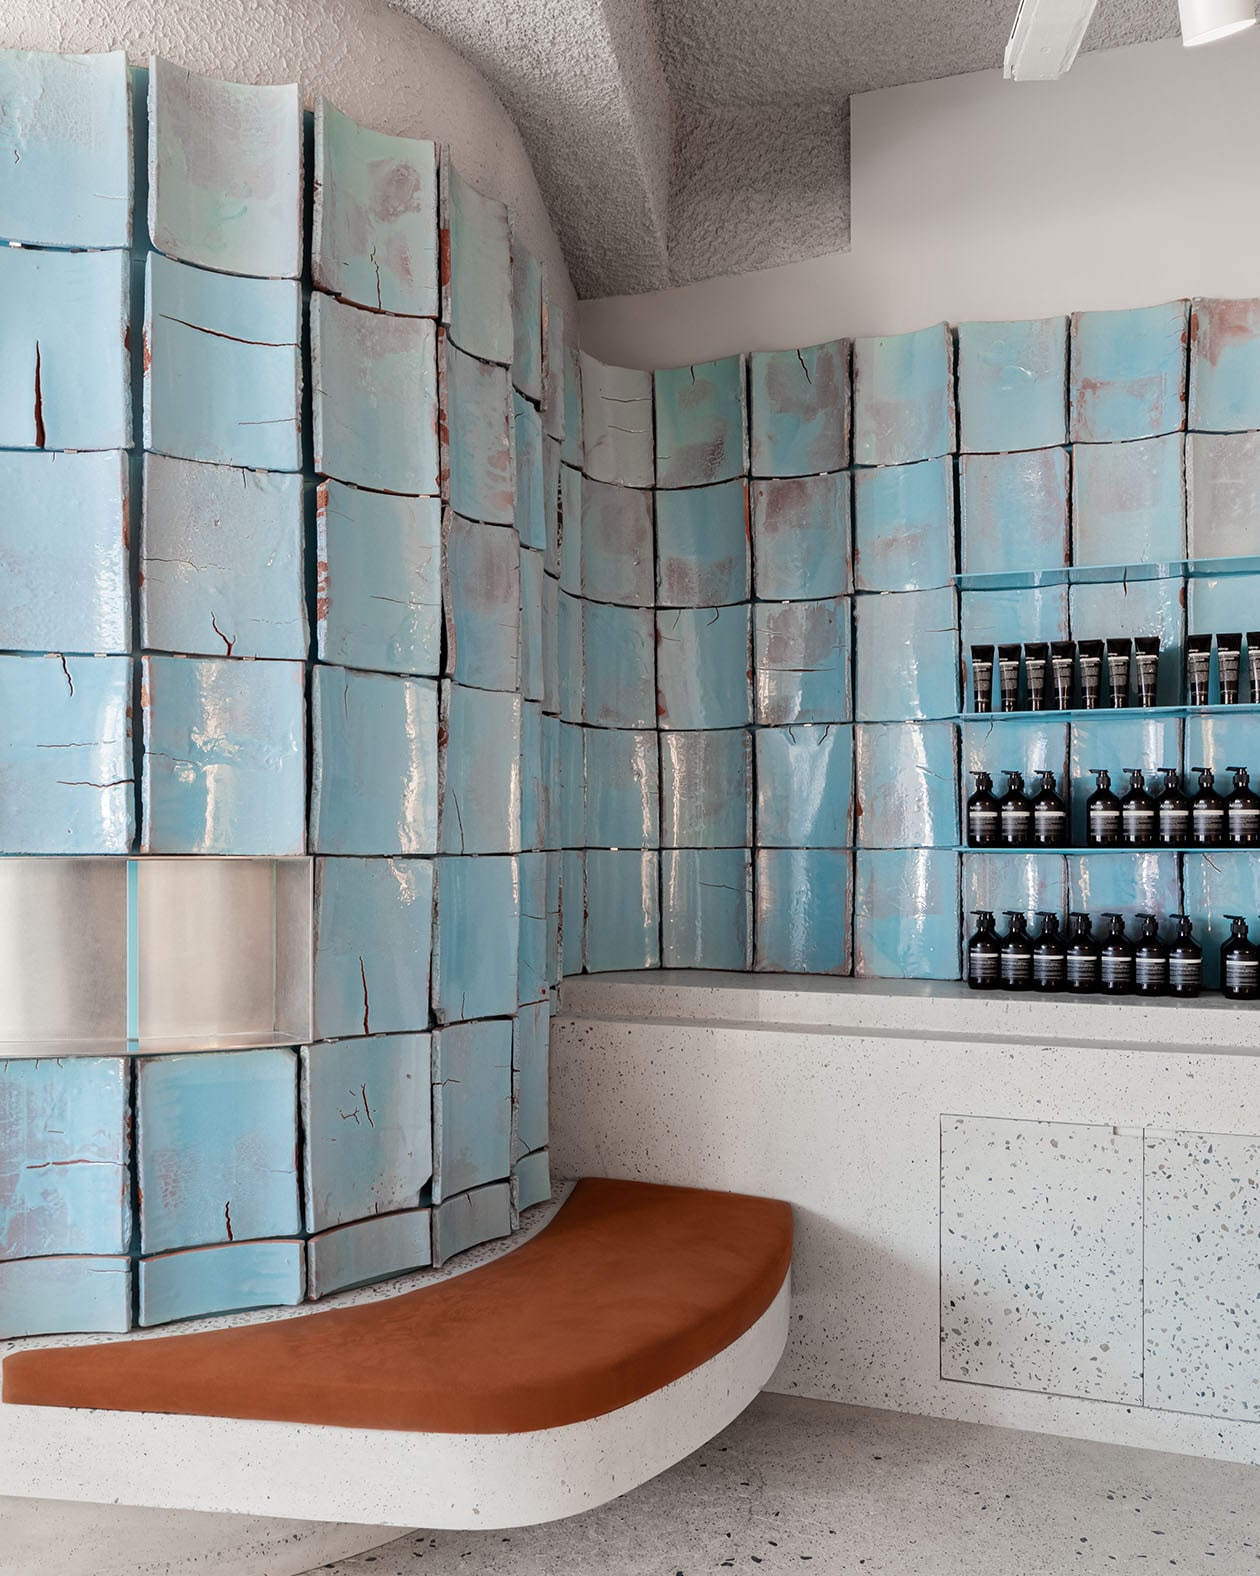 Exhibiting the blue-green reclaimed tiles in the corner